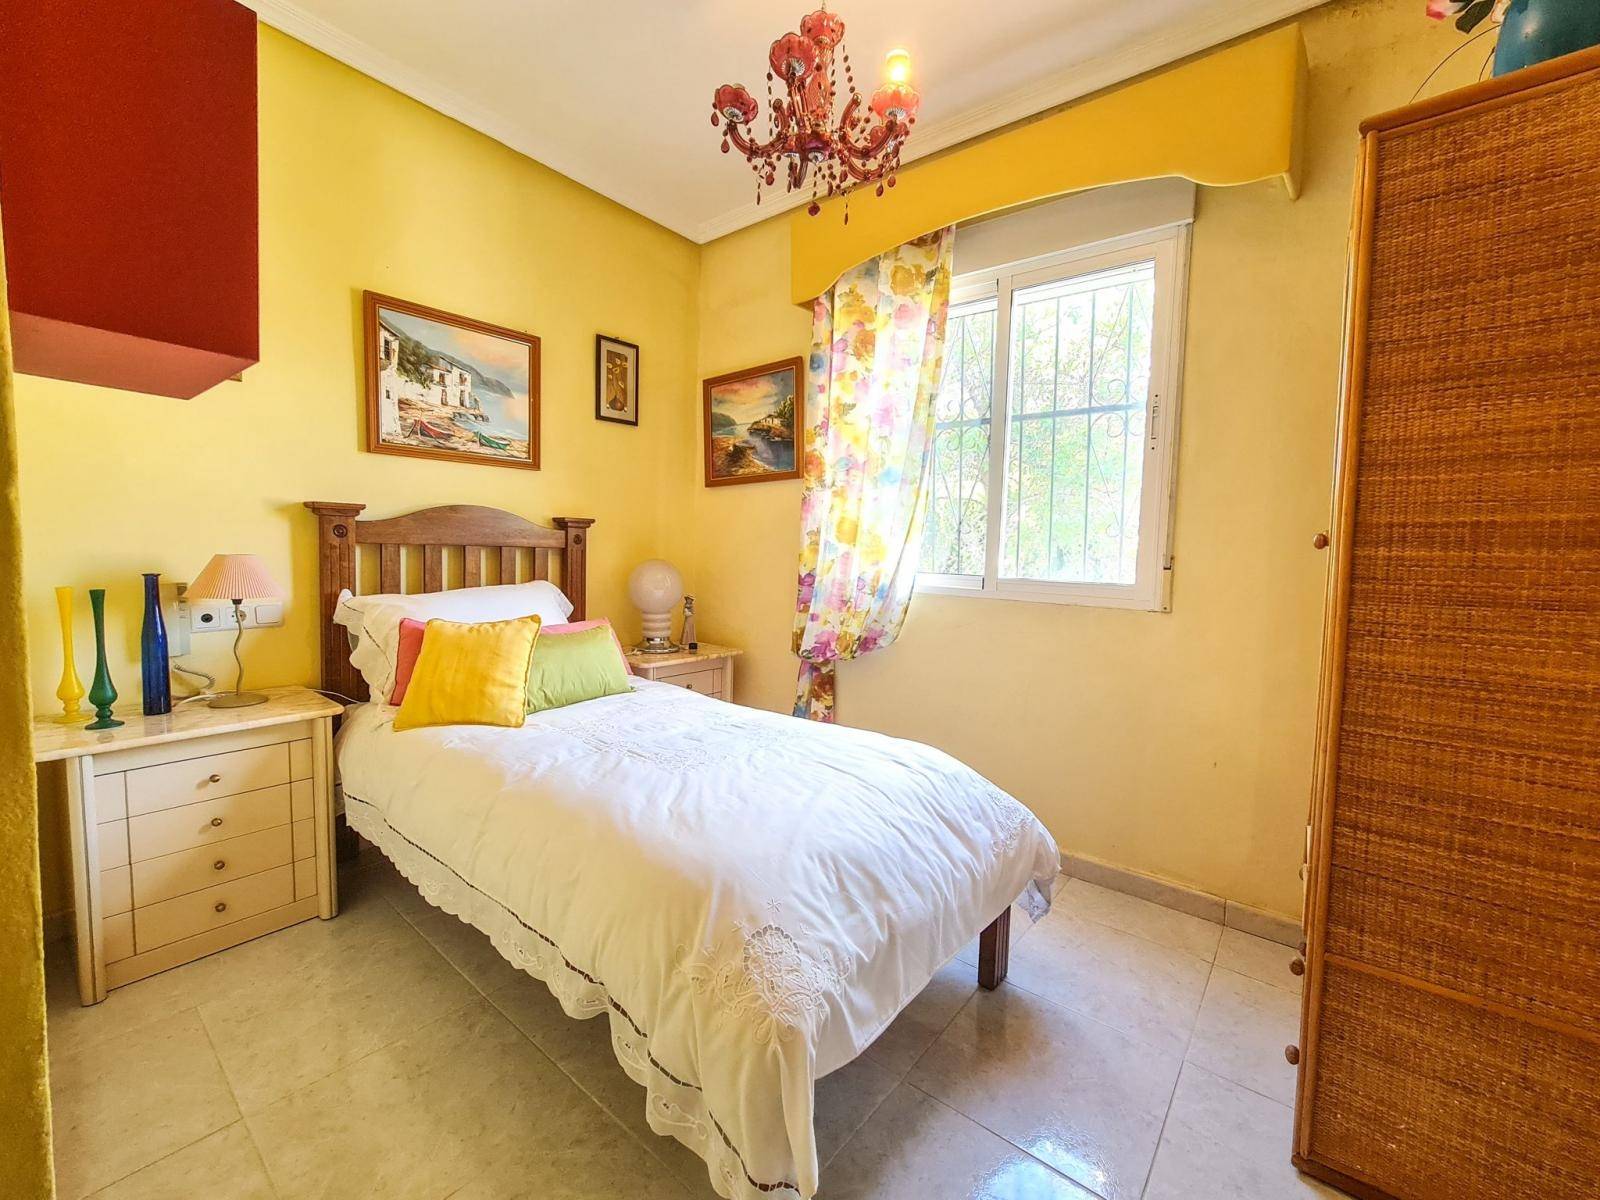 DETACHED VILLA WITH PRIVATE POOL, PARKING AND BEAUTIFUL GARDEN IN CIUADAD QUESADA